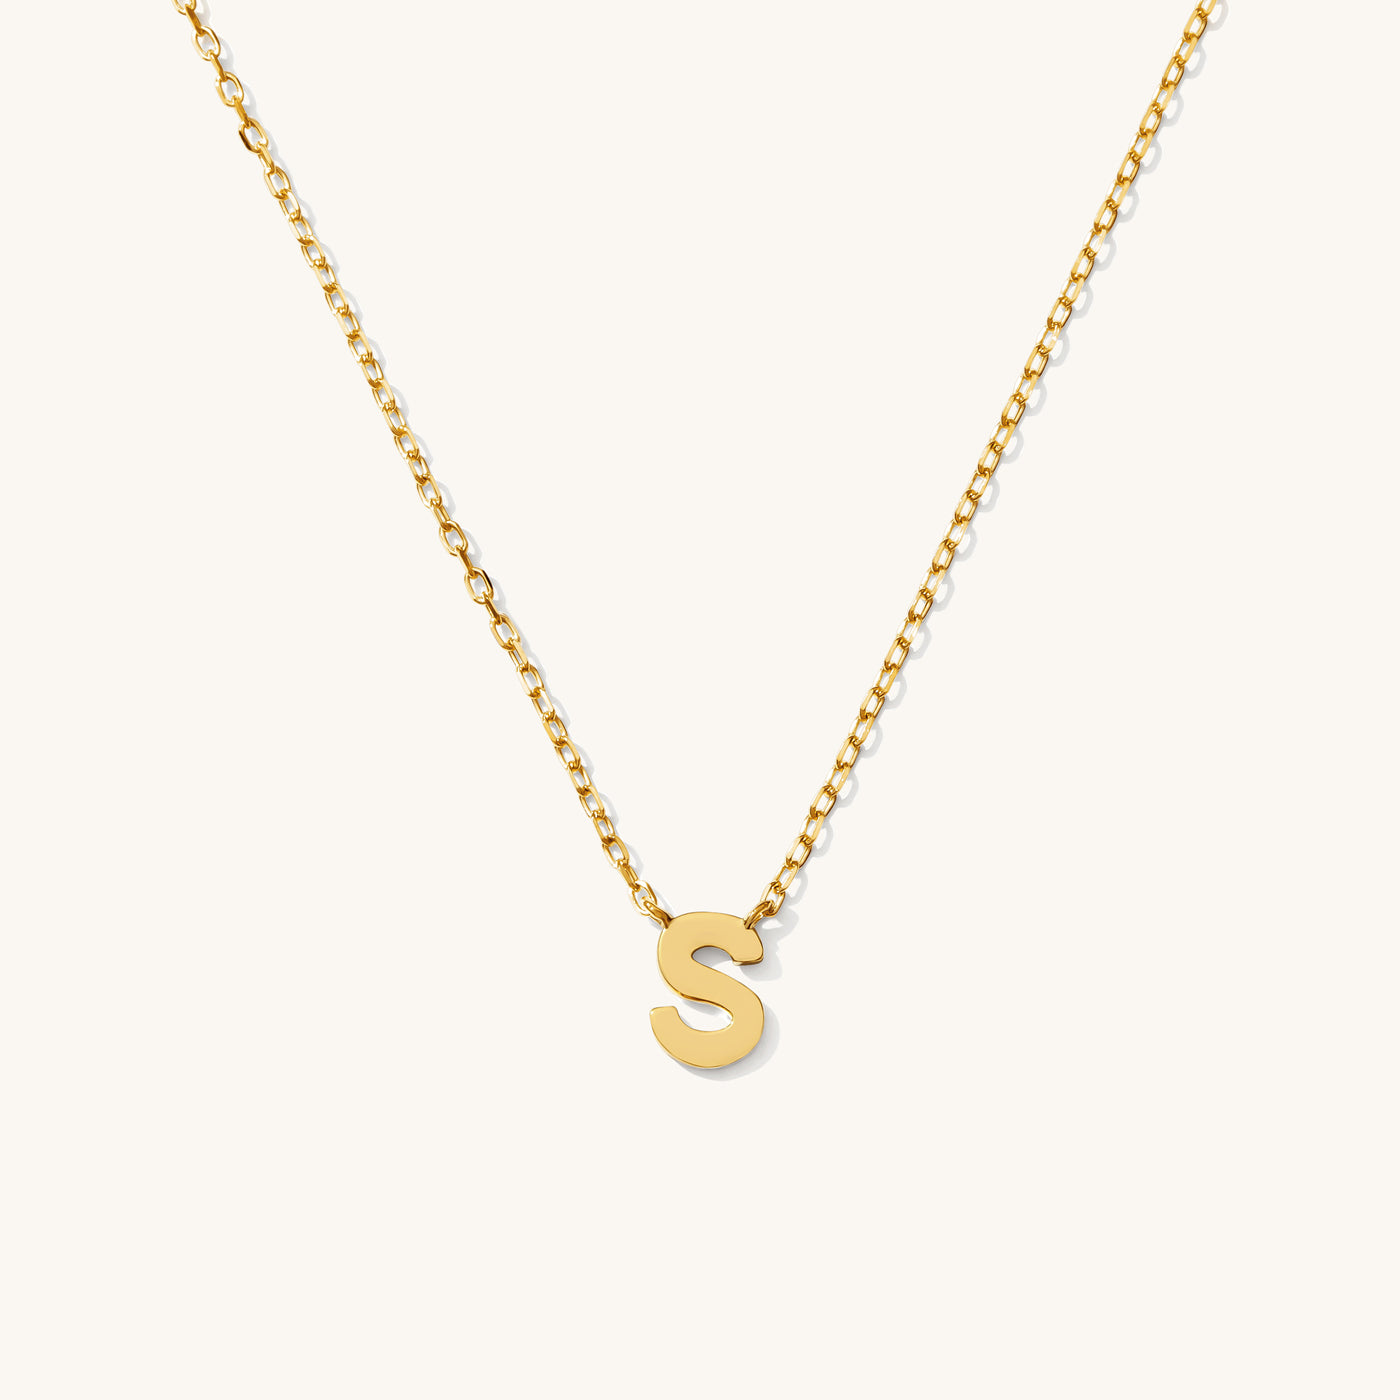 S Tiny Initial Necklace - 14k Solid Gold